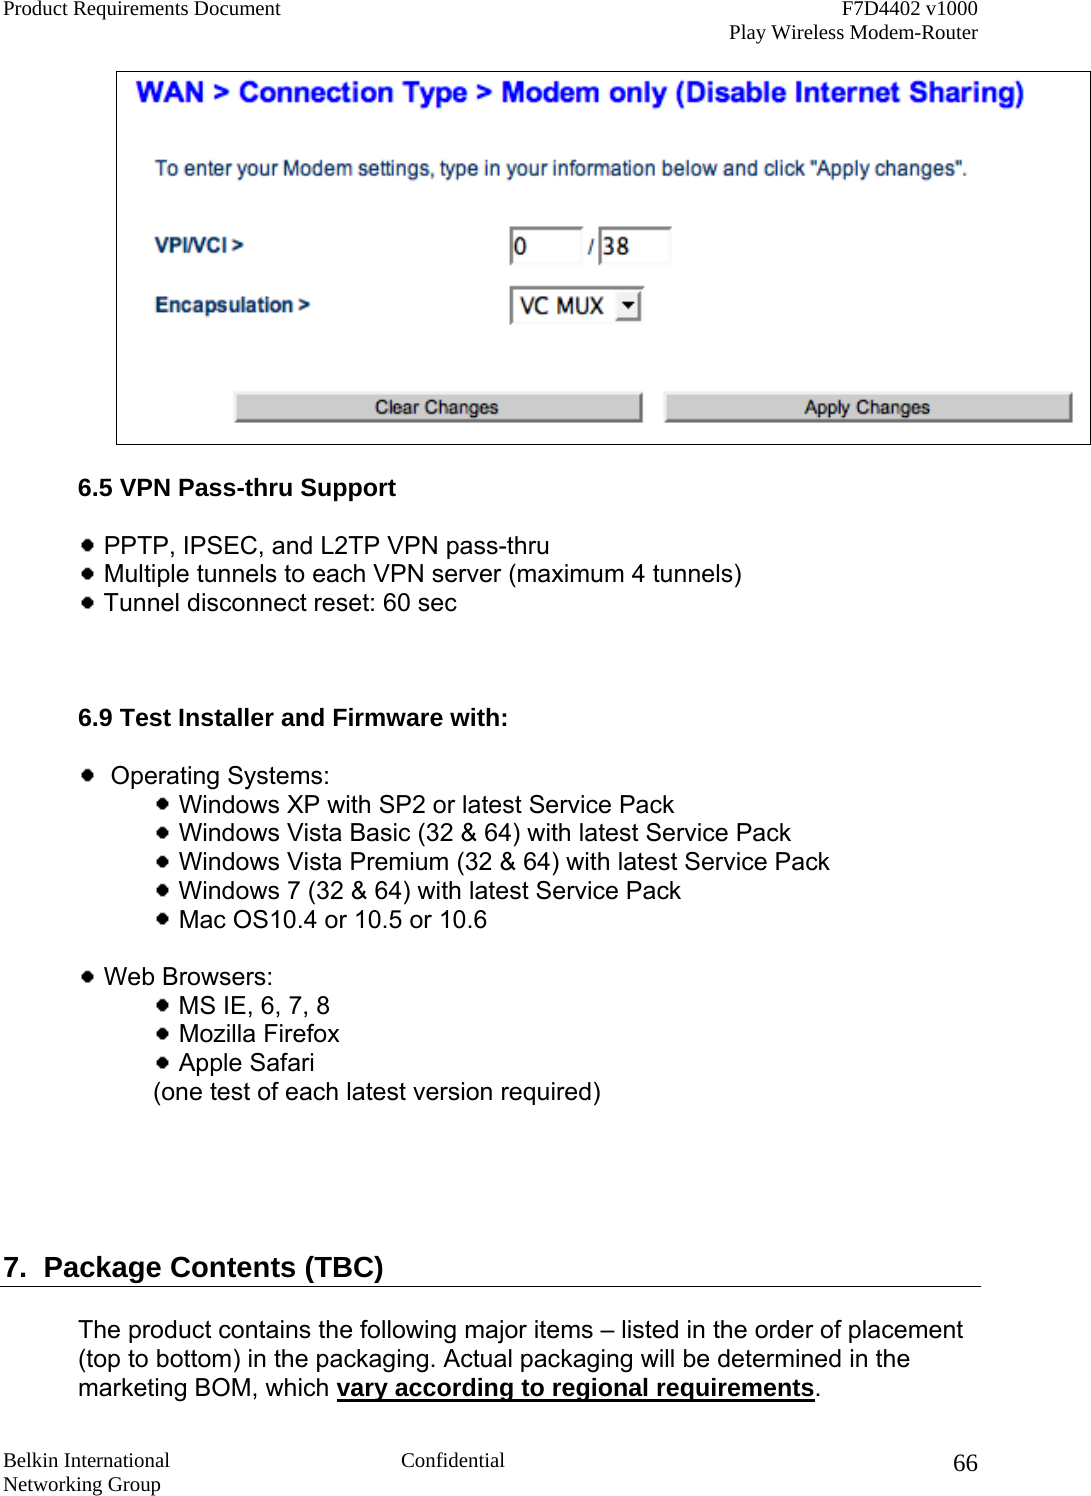 Product Requirements Document    F7D4402 v1000     Play Wireless Modem-Router  Belkin International  Confidential Networking Group 66  6.5 VPN Pass-thru Support    PPTP, IPSEC, and L2TP VPN pass-thru   Multiple tunnels to each VPN server (maximum 4 tunnels)   Tunnel disconnect reset: 60 sec     6.9 Test Installer and Firmware with:     Operating Systems:   Windows XP with SP2 or latest Service Pack   Windows Vista Basic (32 &amp; 64) with latest Service Pack  Windows Vista Premium (32 &amp; 64) with latest Service Pack  Windows 7 (32 &amp; 64) with latest Service Pack  Mac OS10.4 or 10.5 or 10.6   Web Browsers:  MS IE, 6, 7, 8  Mozilla Firefox  Apple Safari  (one test of each latest version required)       7.  Package Contents (TBC)  The product contains the following major items – listed in the order of placement (top to bottom) in the packaging. Actual packaging will be determined in the marketing BOM, which vary according to regional requirements. 